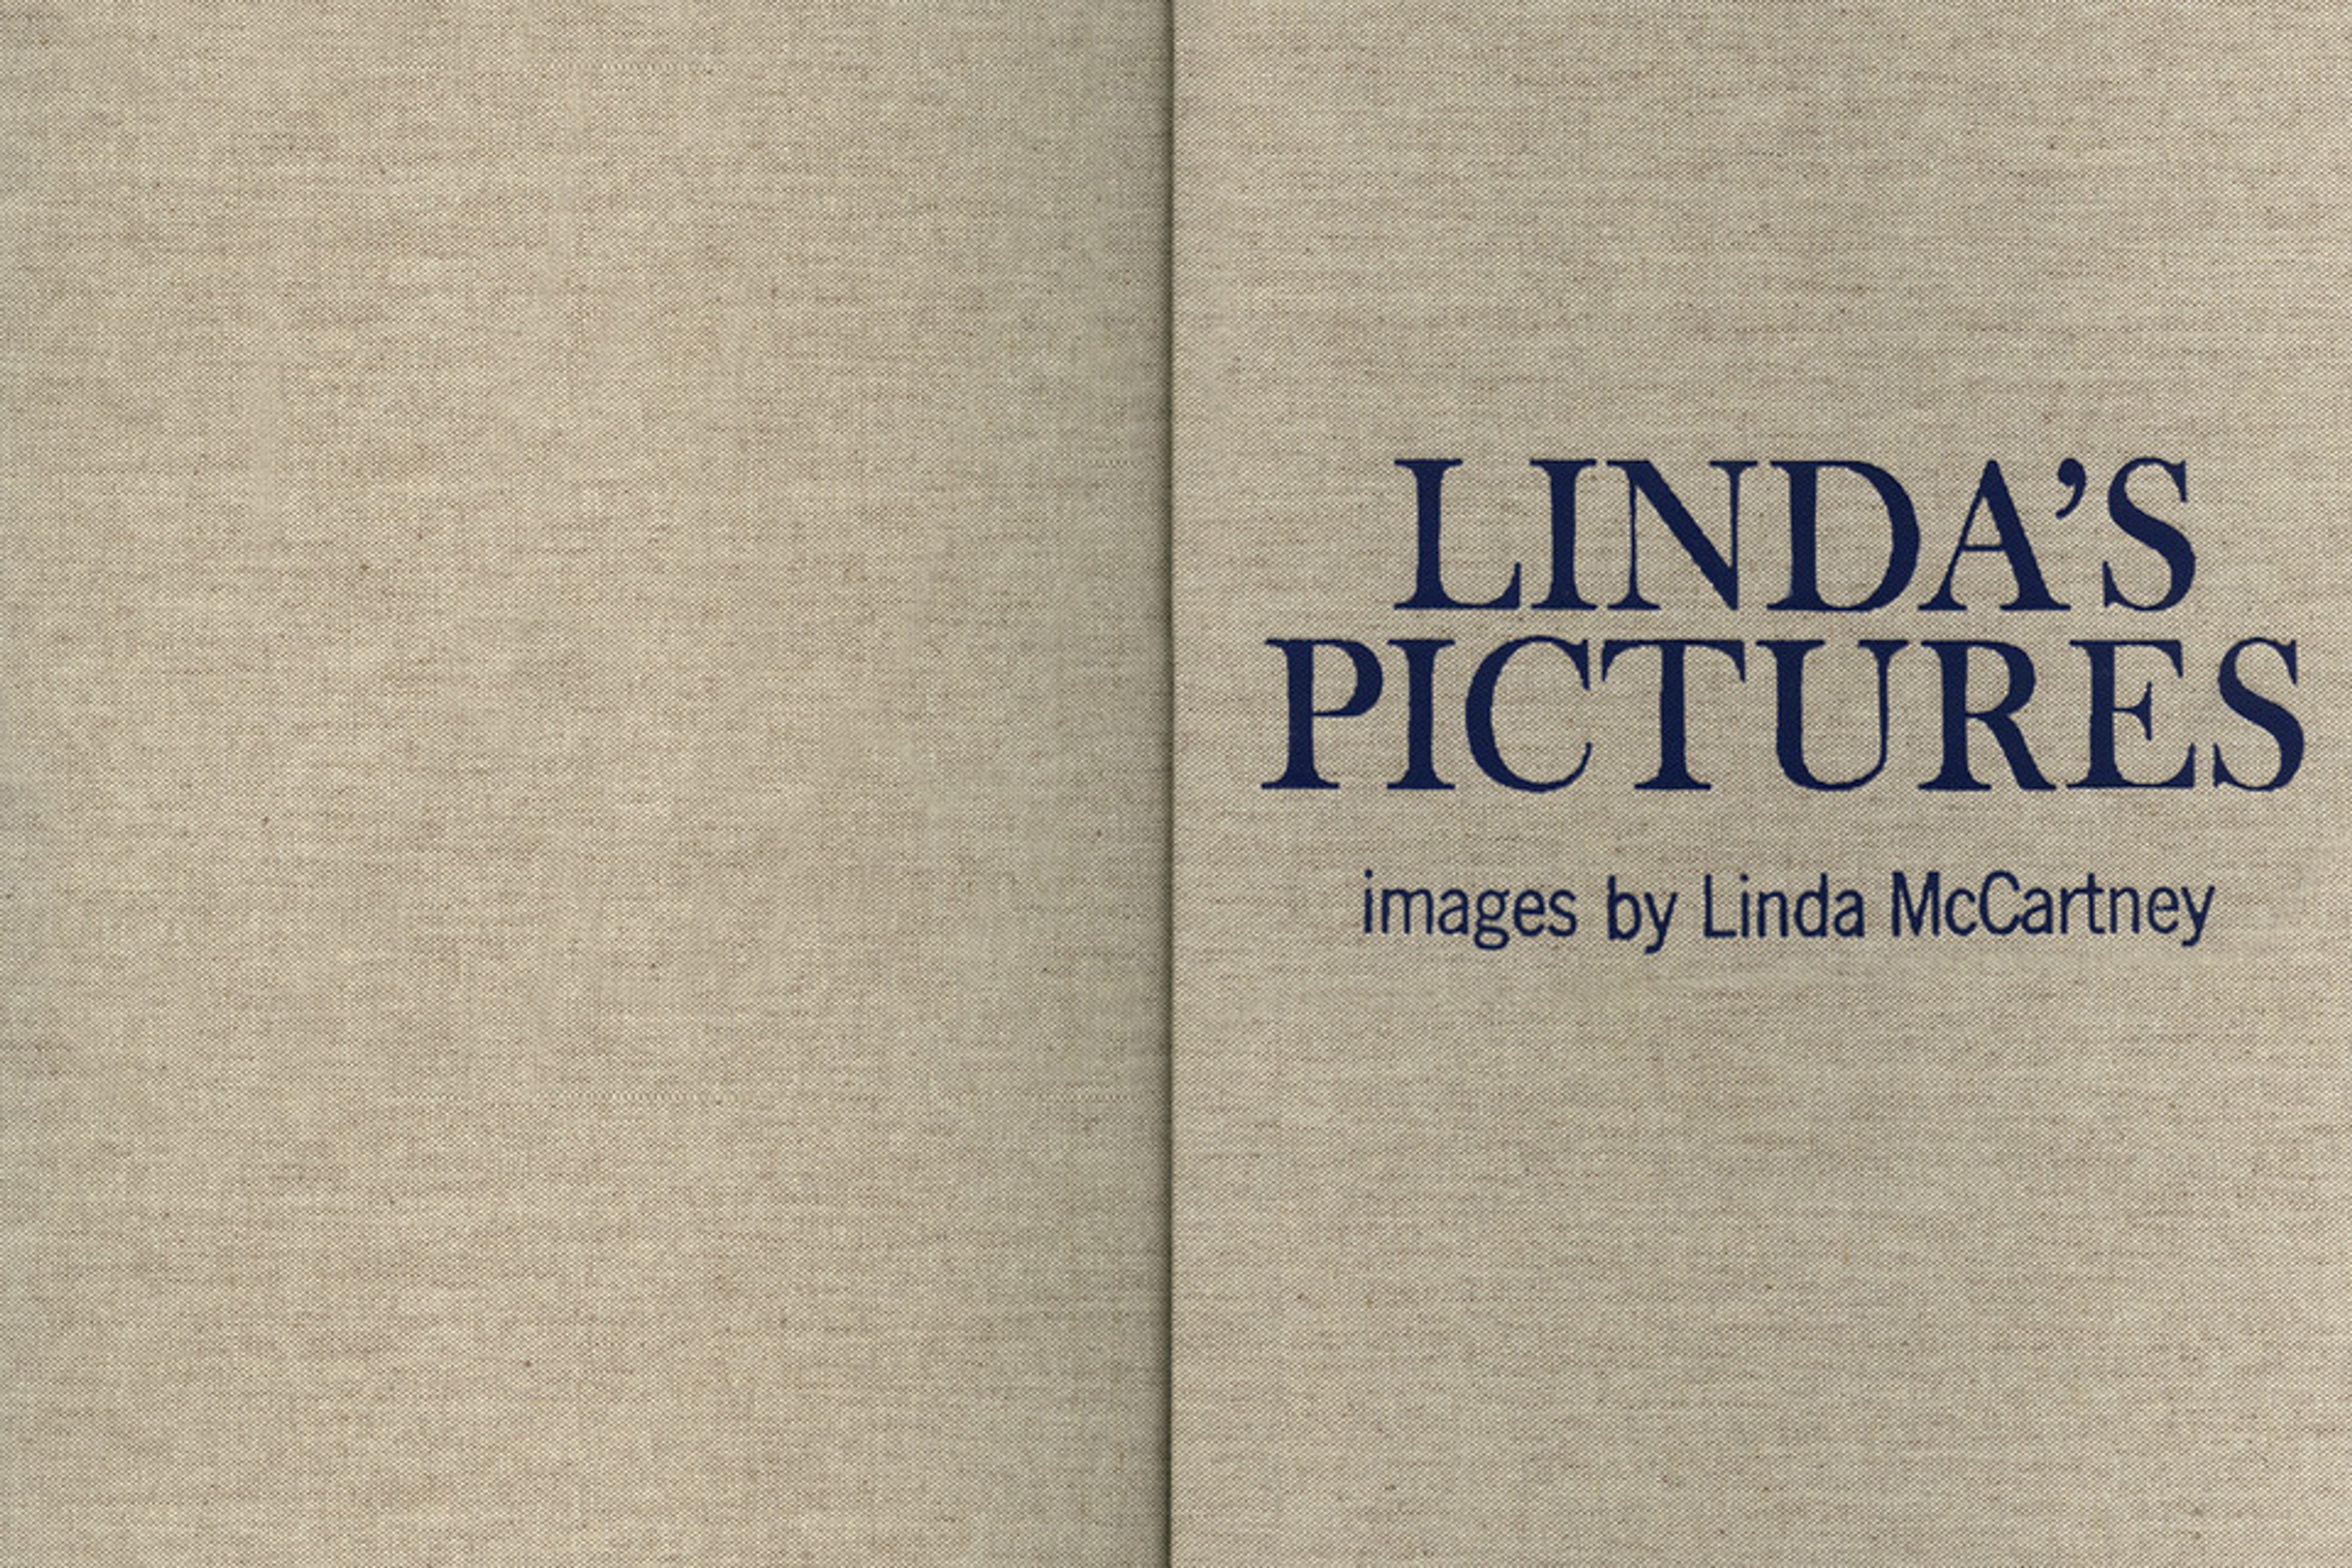 Photo of Linda's Pictures book cover